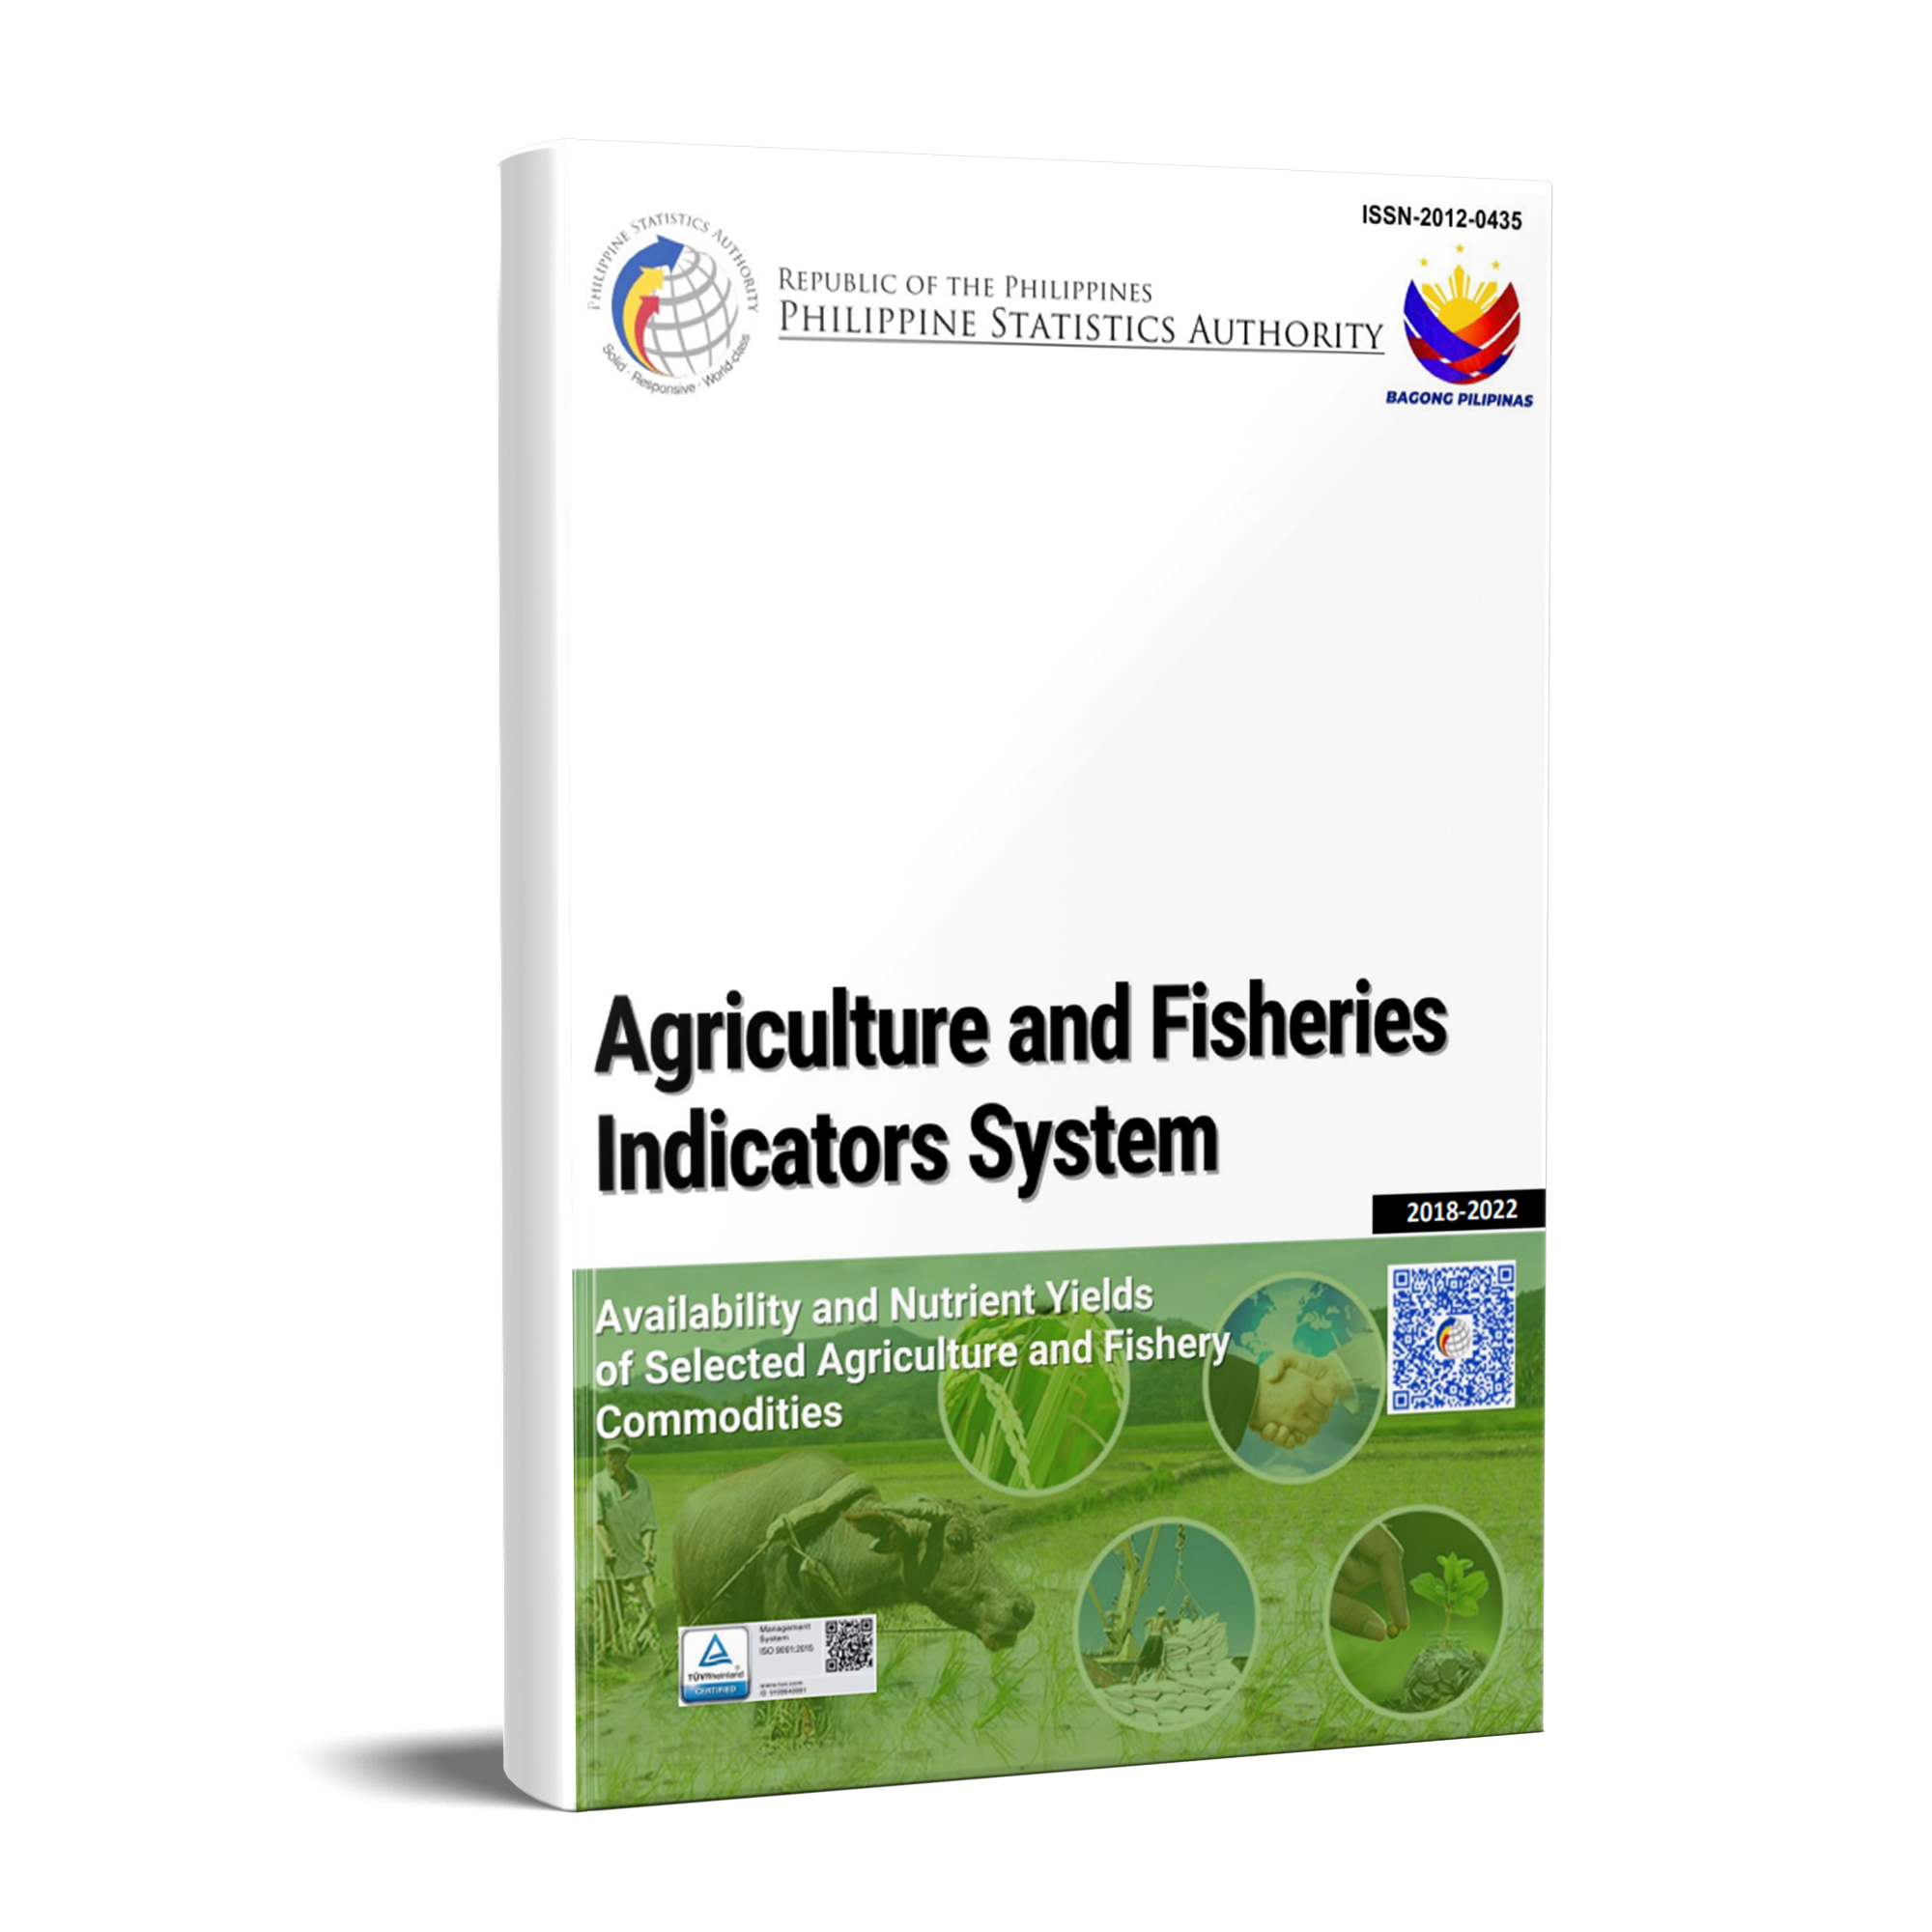 Agriculture and Fisheries Indicators System: Availability and Nutrient Yields of Selected Agriculture and Fishery Commodities